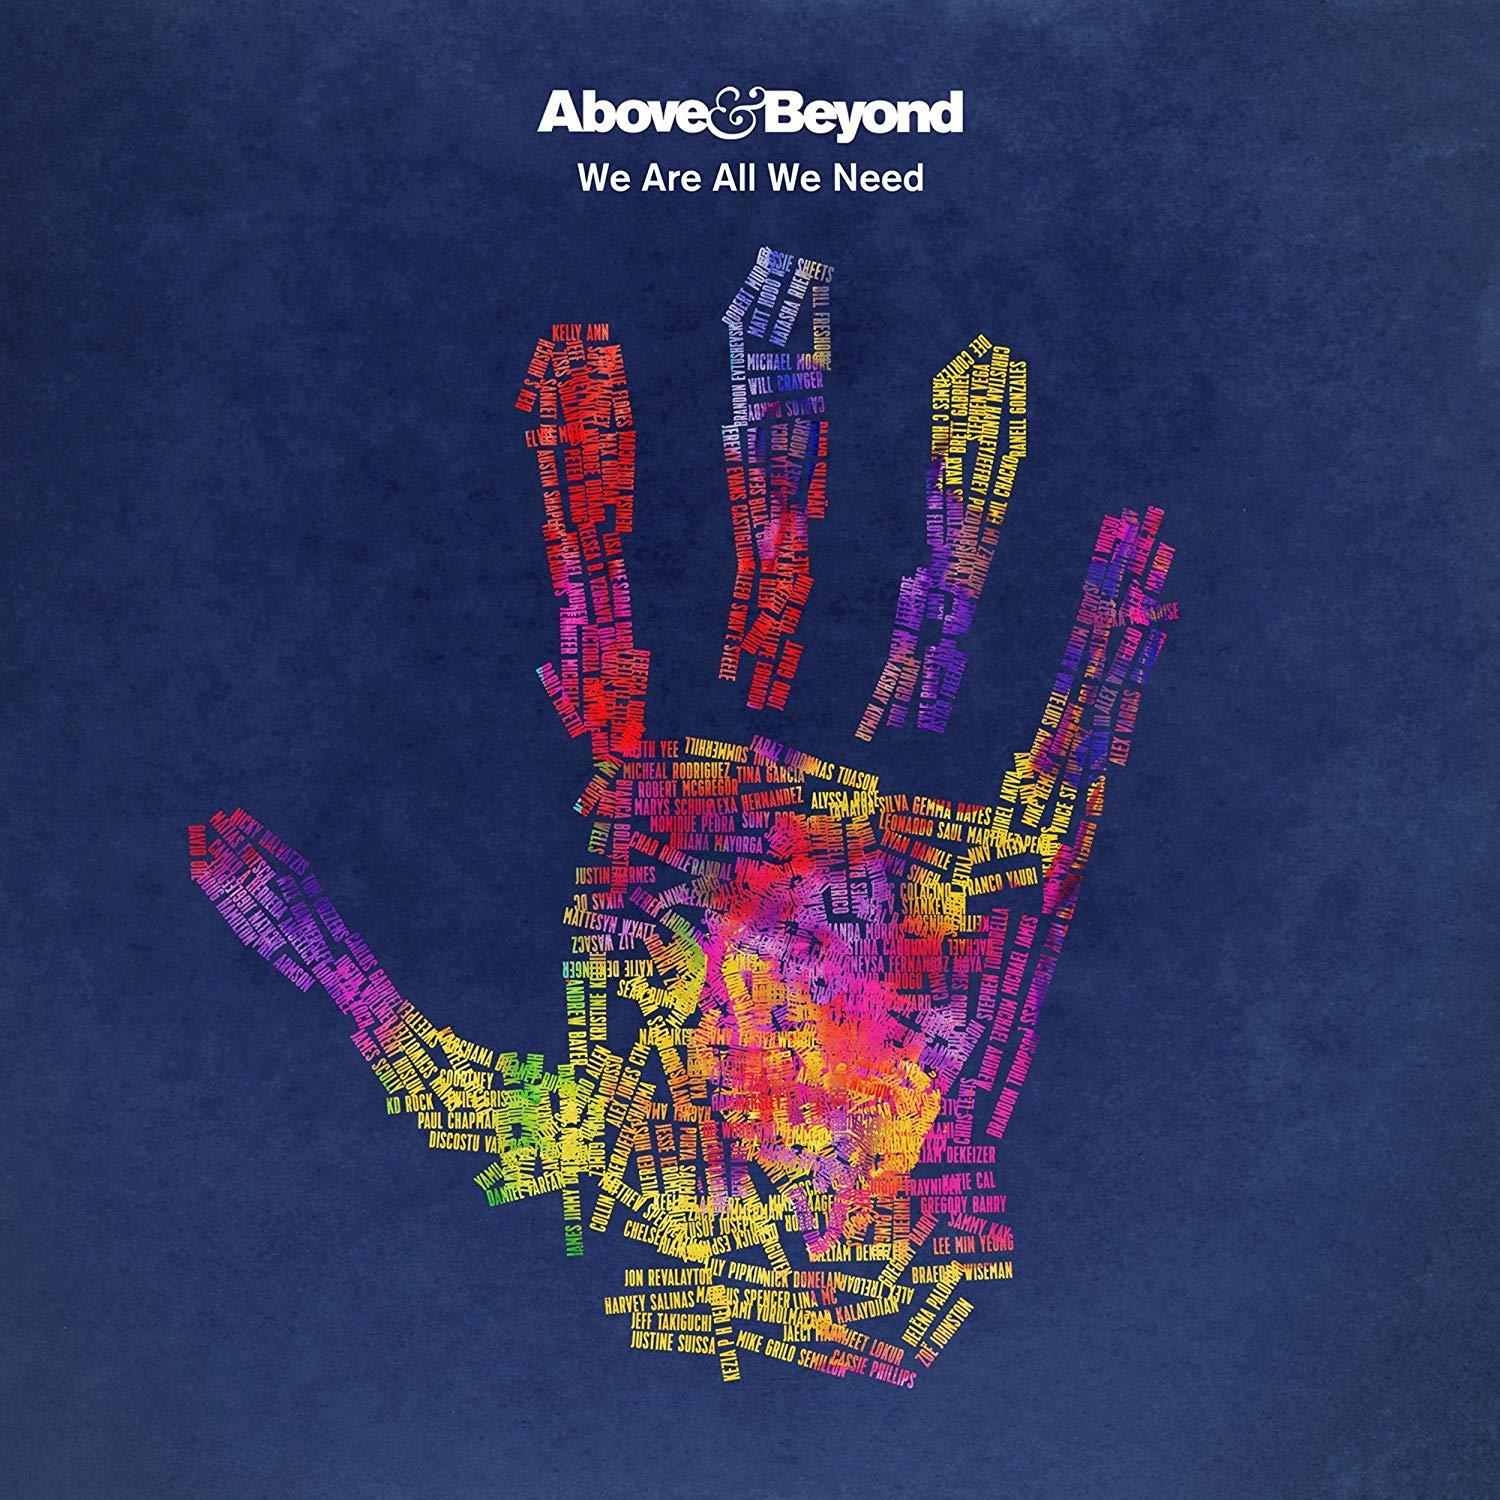 ALL - WE Beyond (Vinyl) NEED - ARE WE & Above